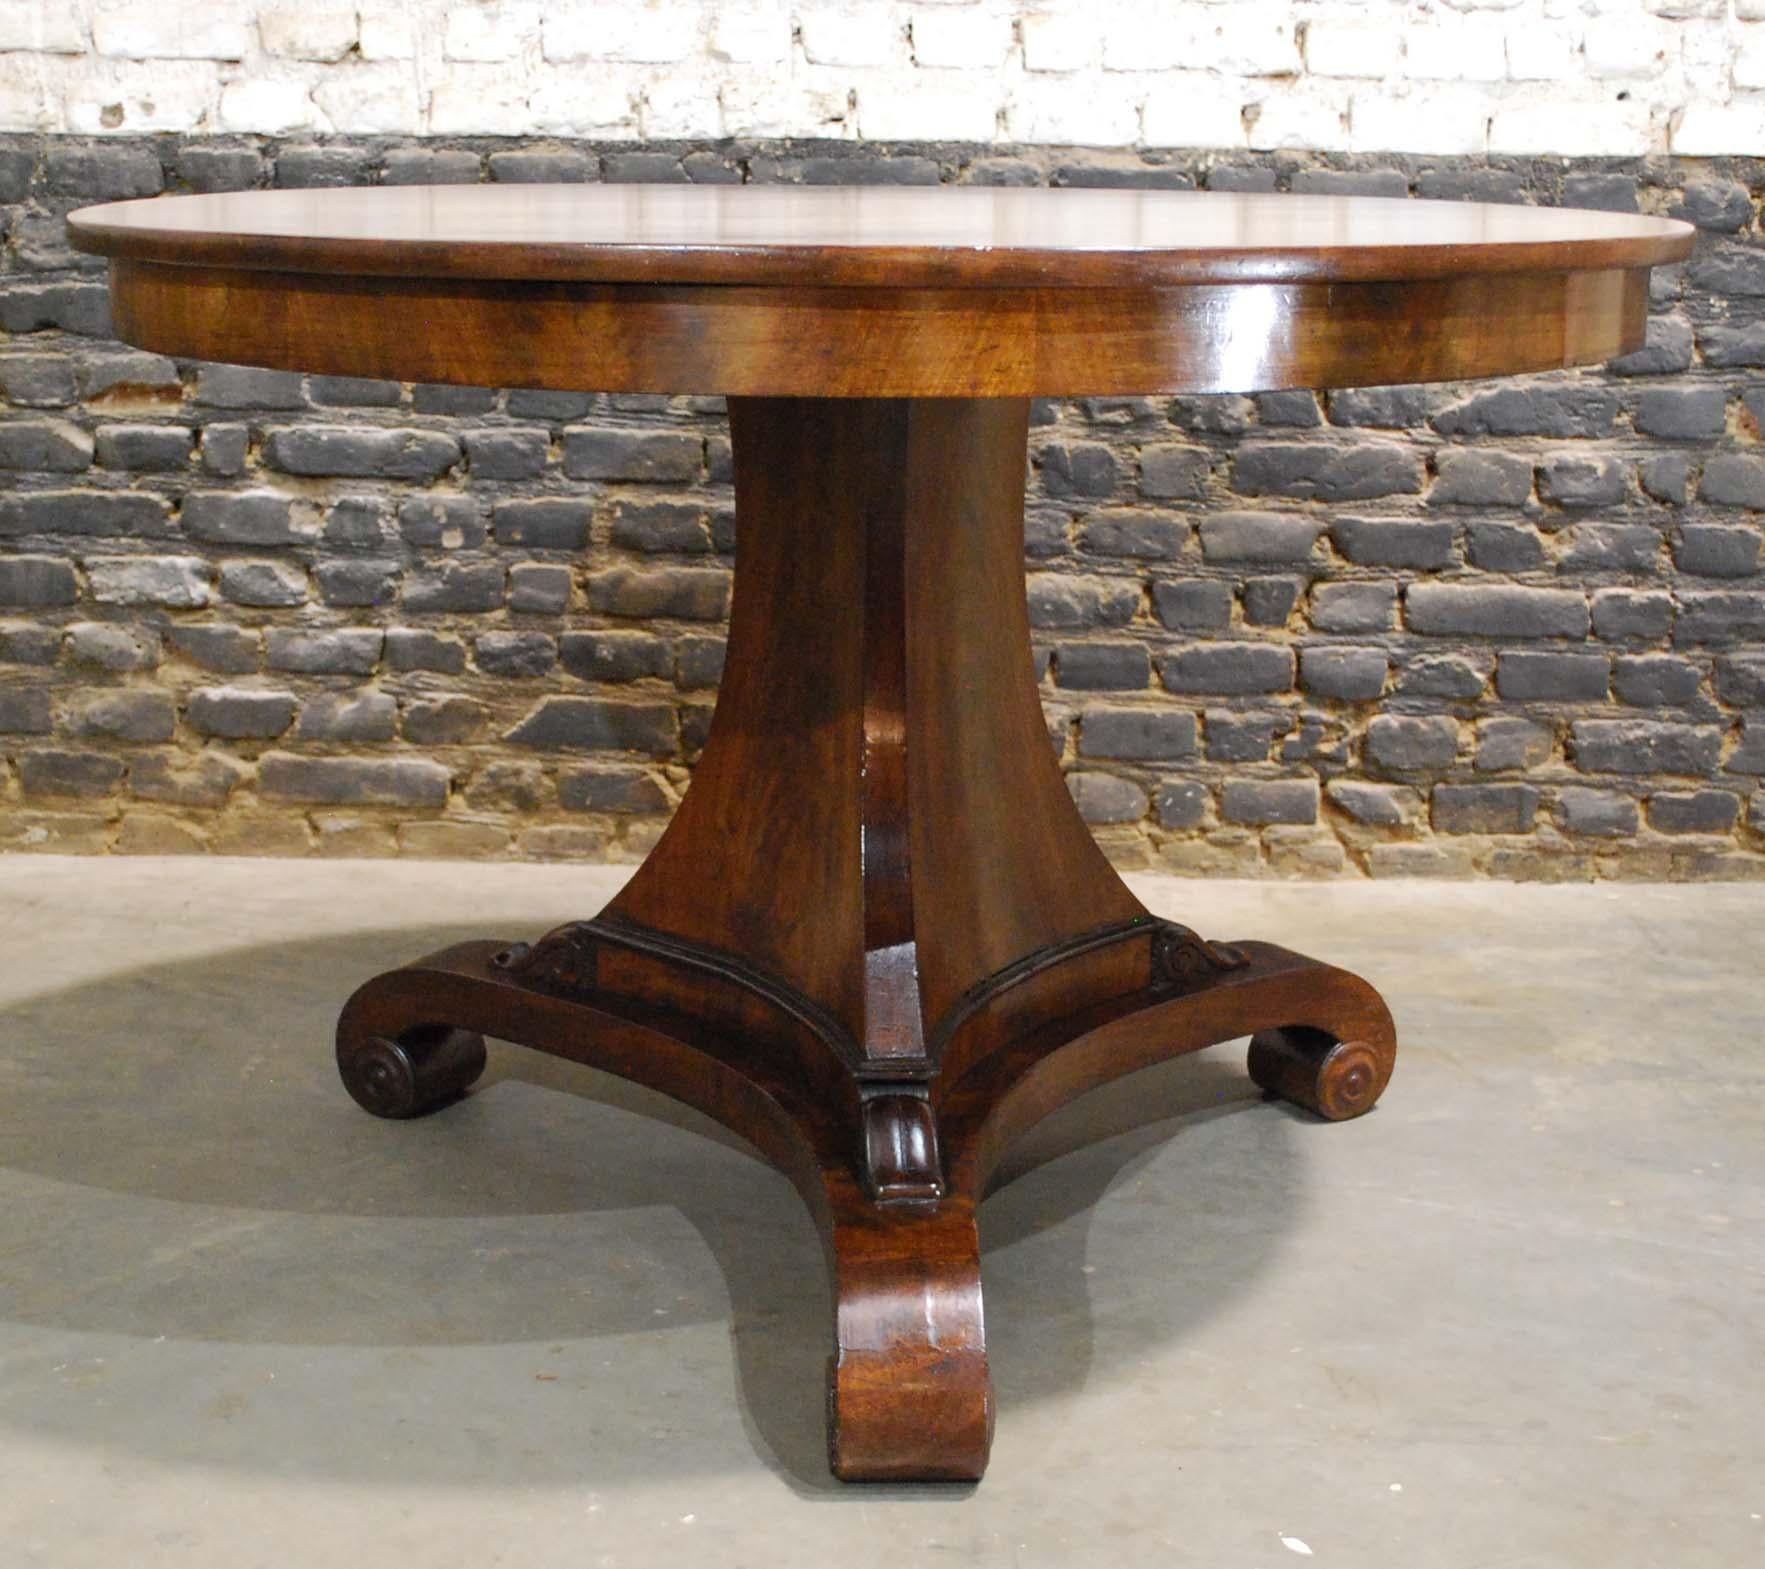 A beautiful round mahogany dining table on a trefoil platform base that ends in elegant scrolls.
The base has an elegant triangular column that ends in carved feet to support the tabletop. The tabletop is made in 0.7-inch thick solid mahogany in a